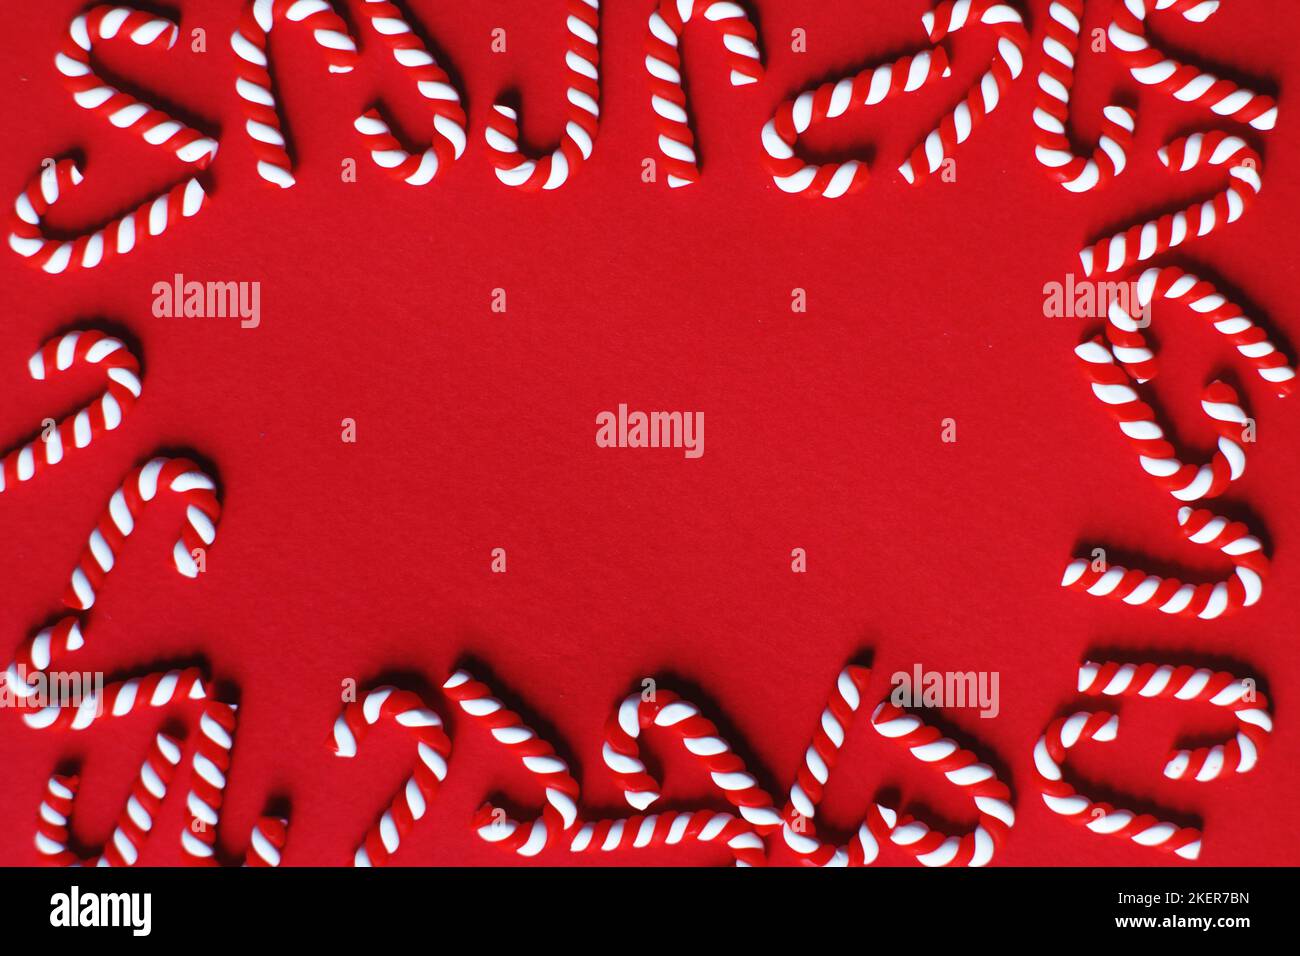 Flat lay Christmas composition with frame of candy canes on a red background. Copy space for text. Stock Photo